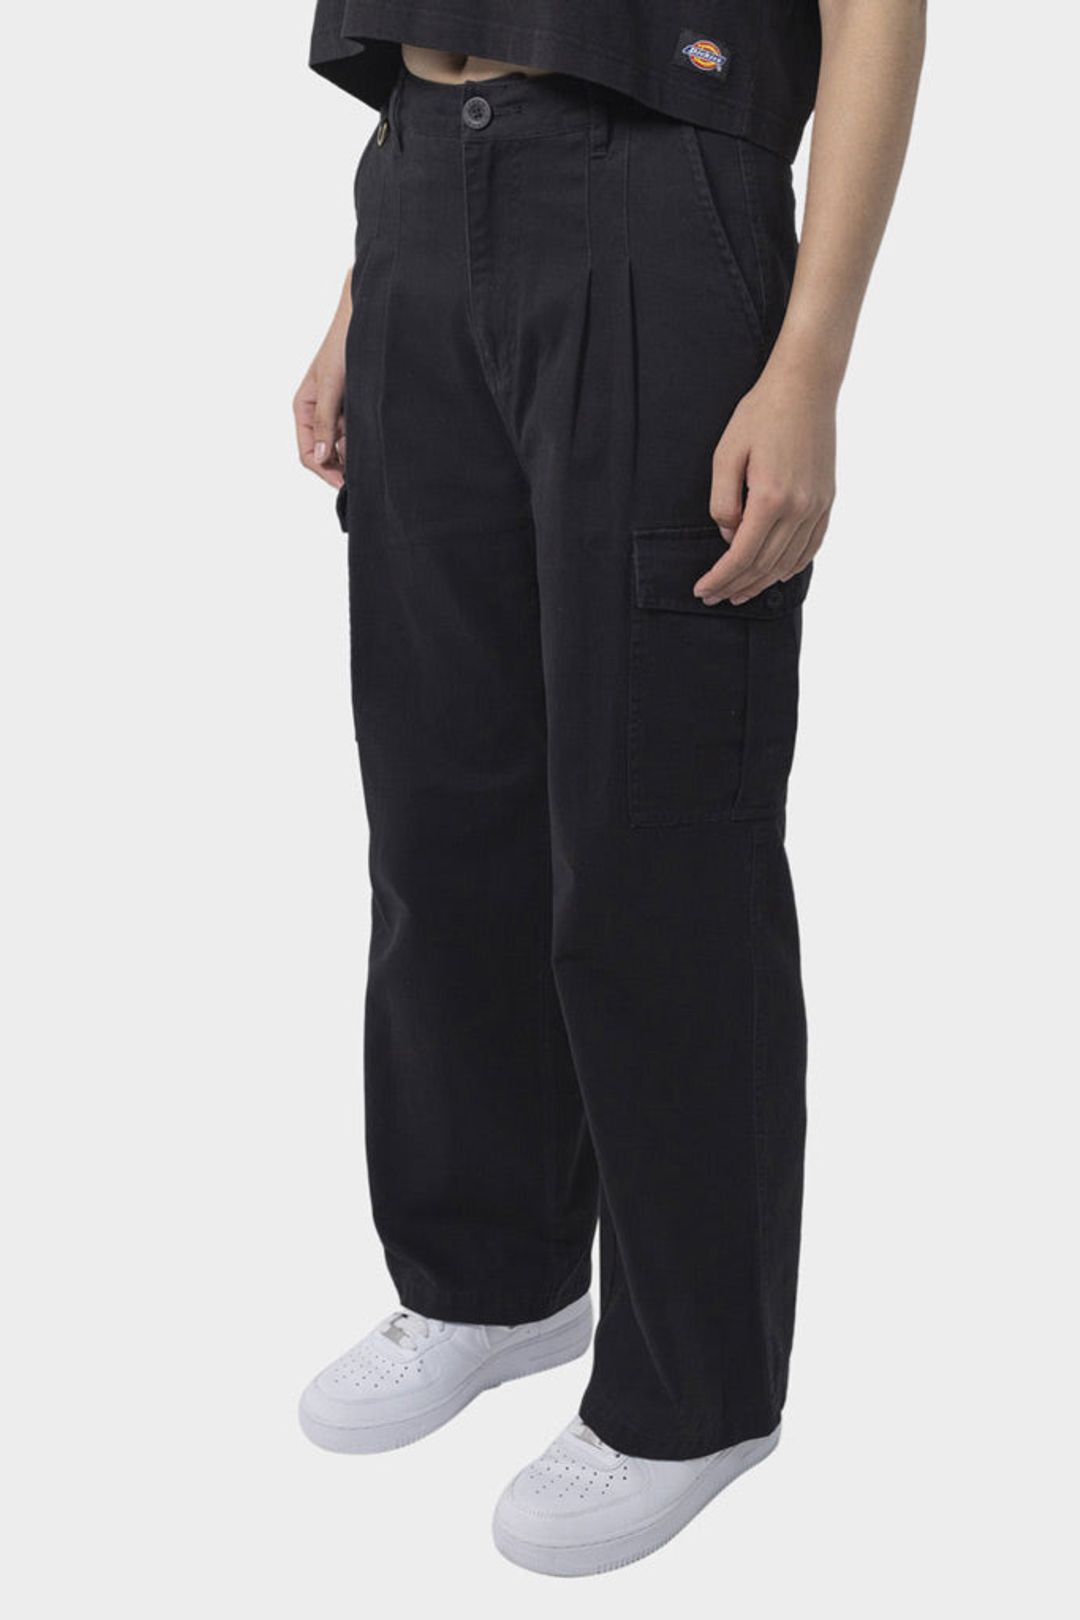 HOLLAND PLEATED CARGO PANT - SUNDAY BEST TRADING CO